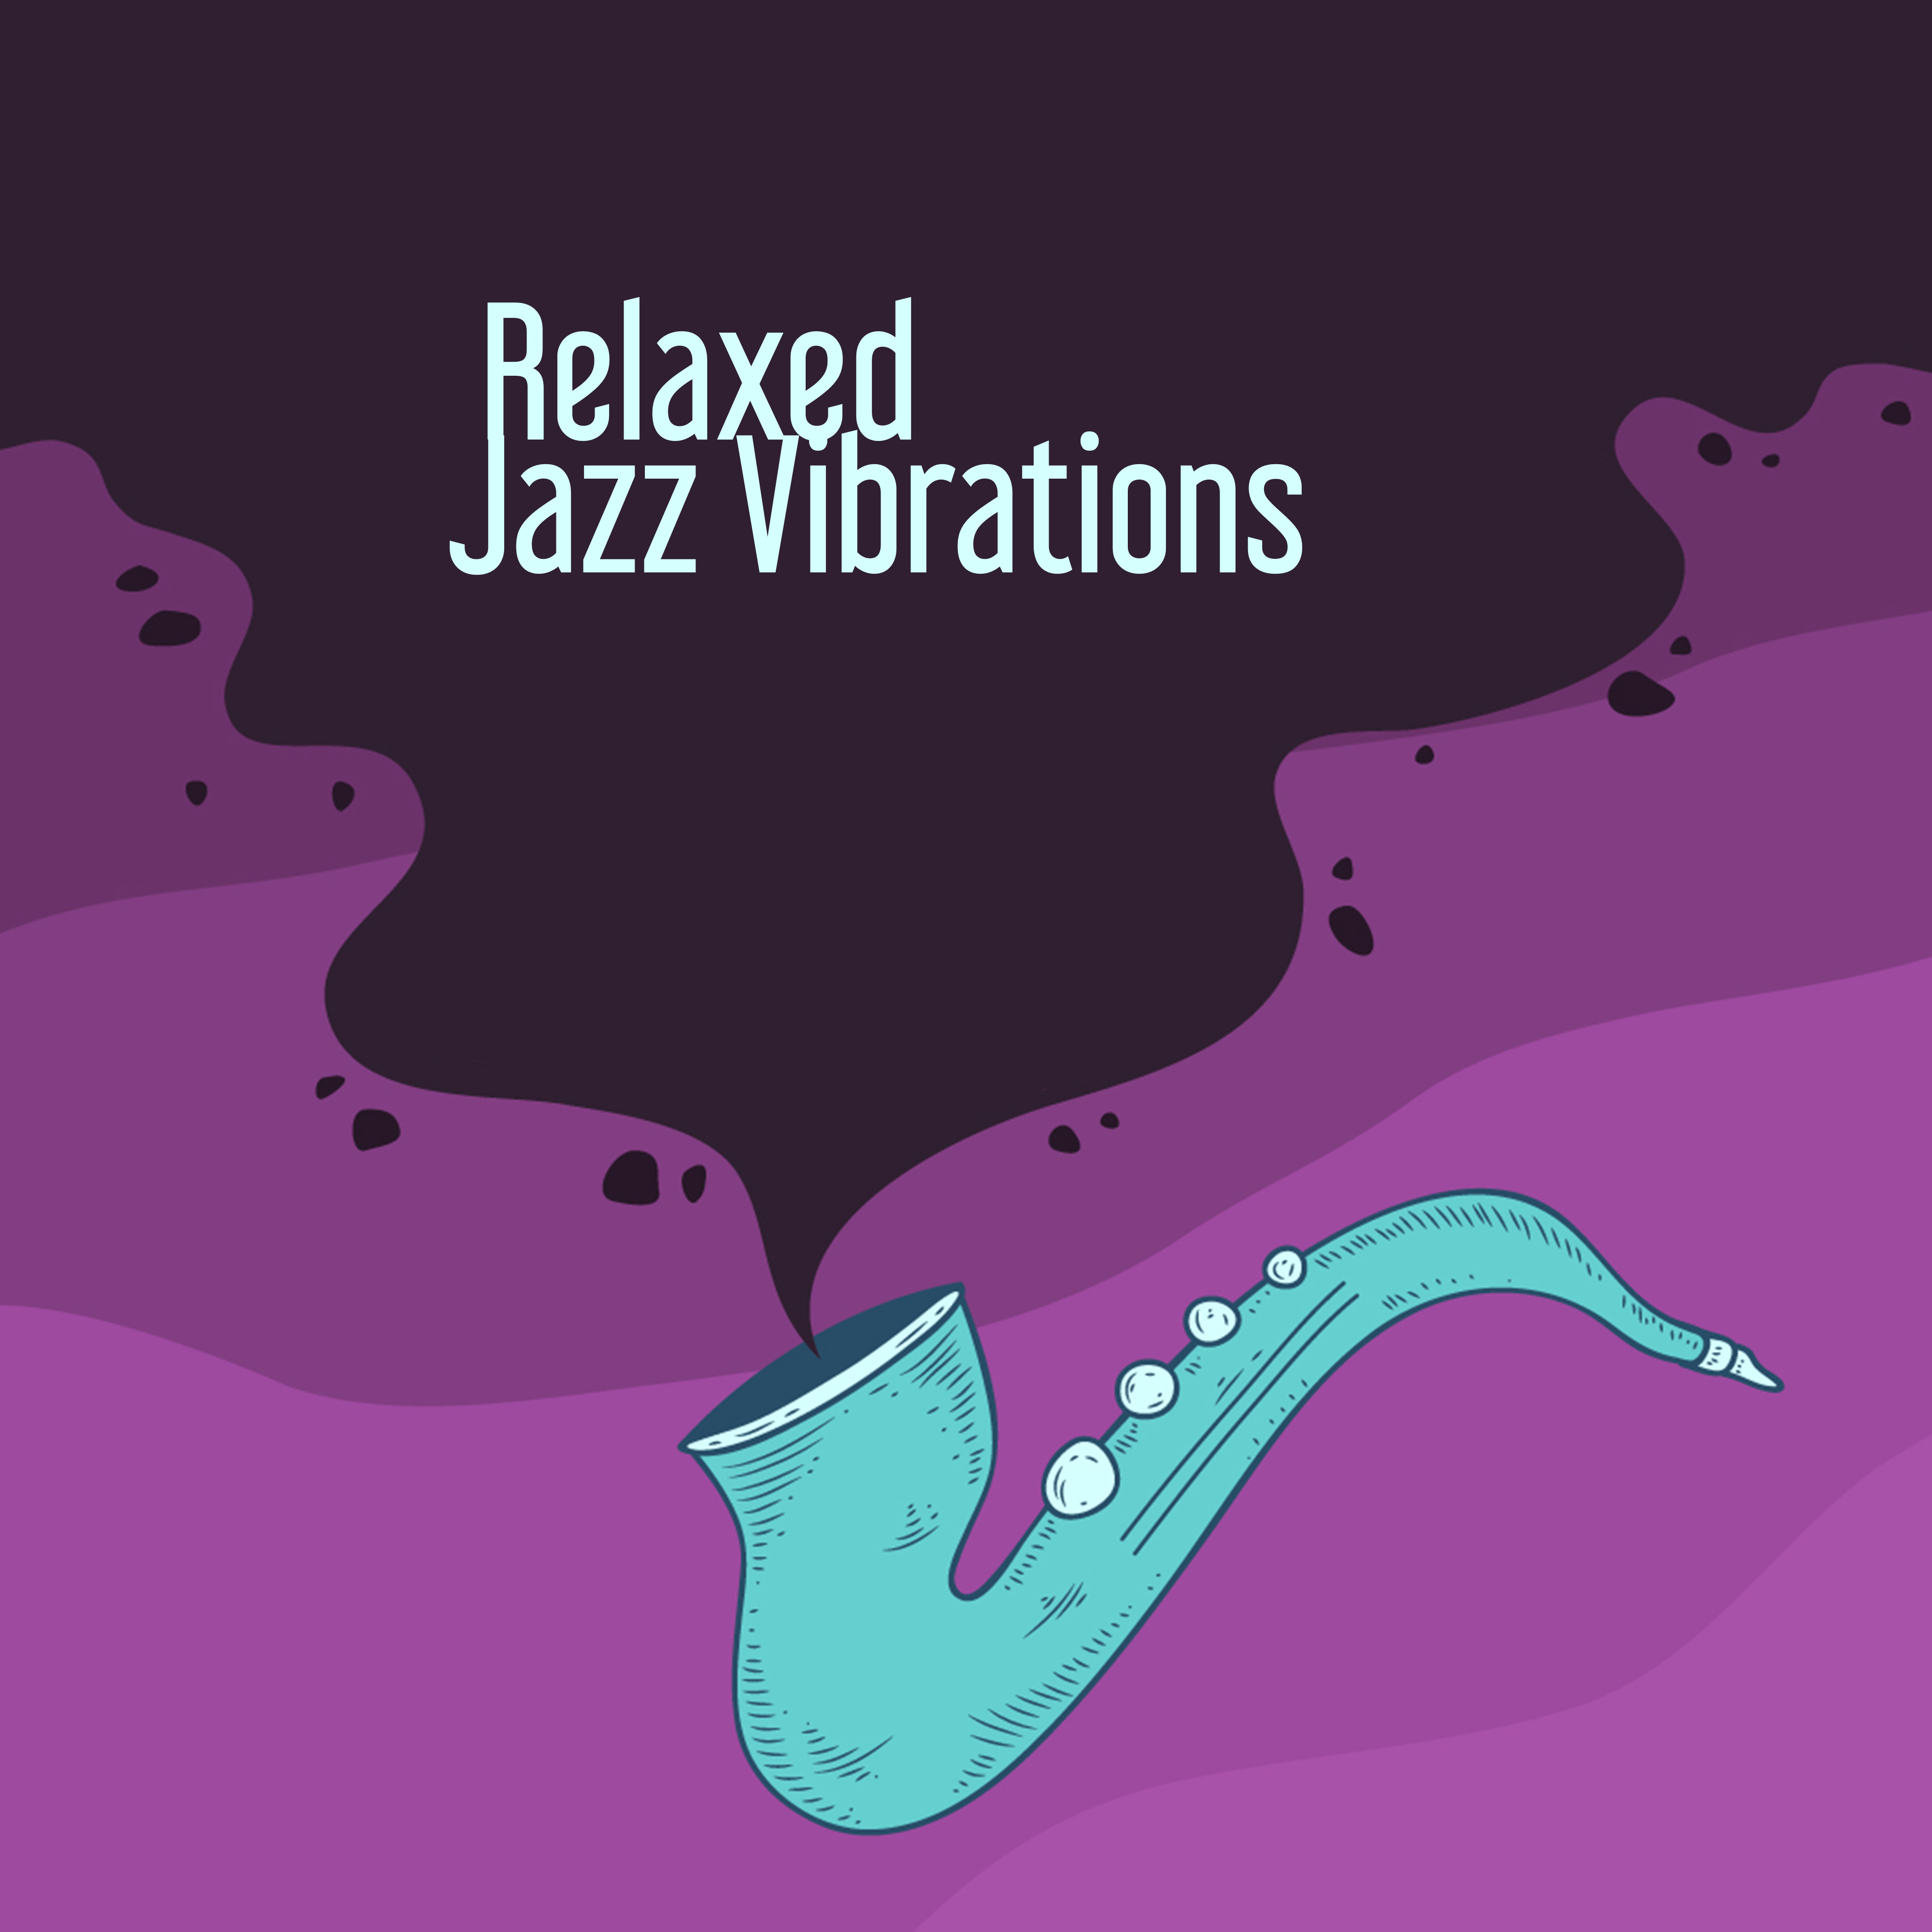 Relaxed Jazz Vibrations